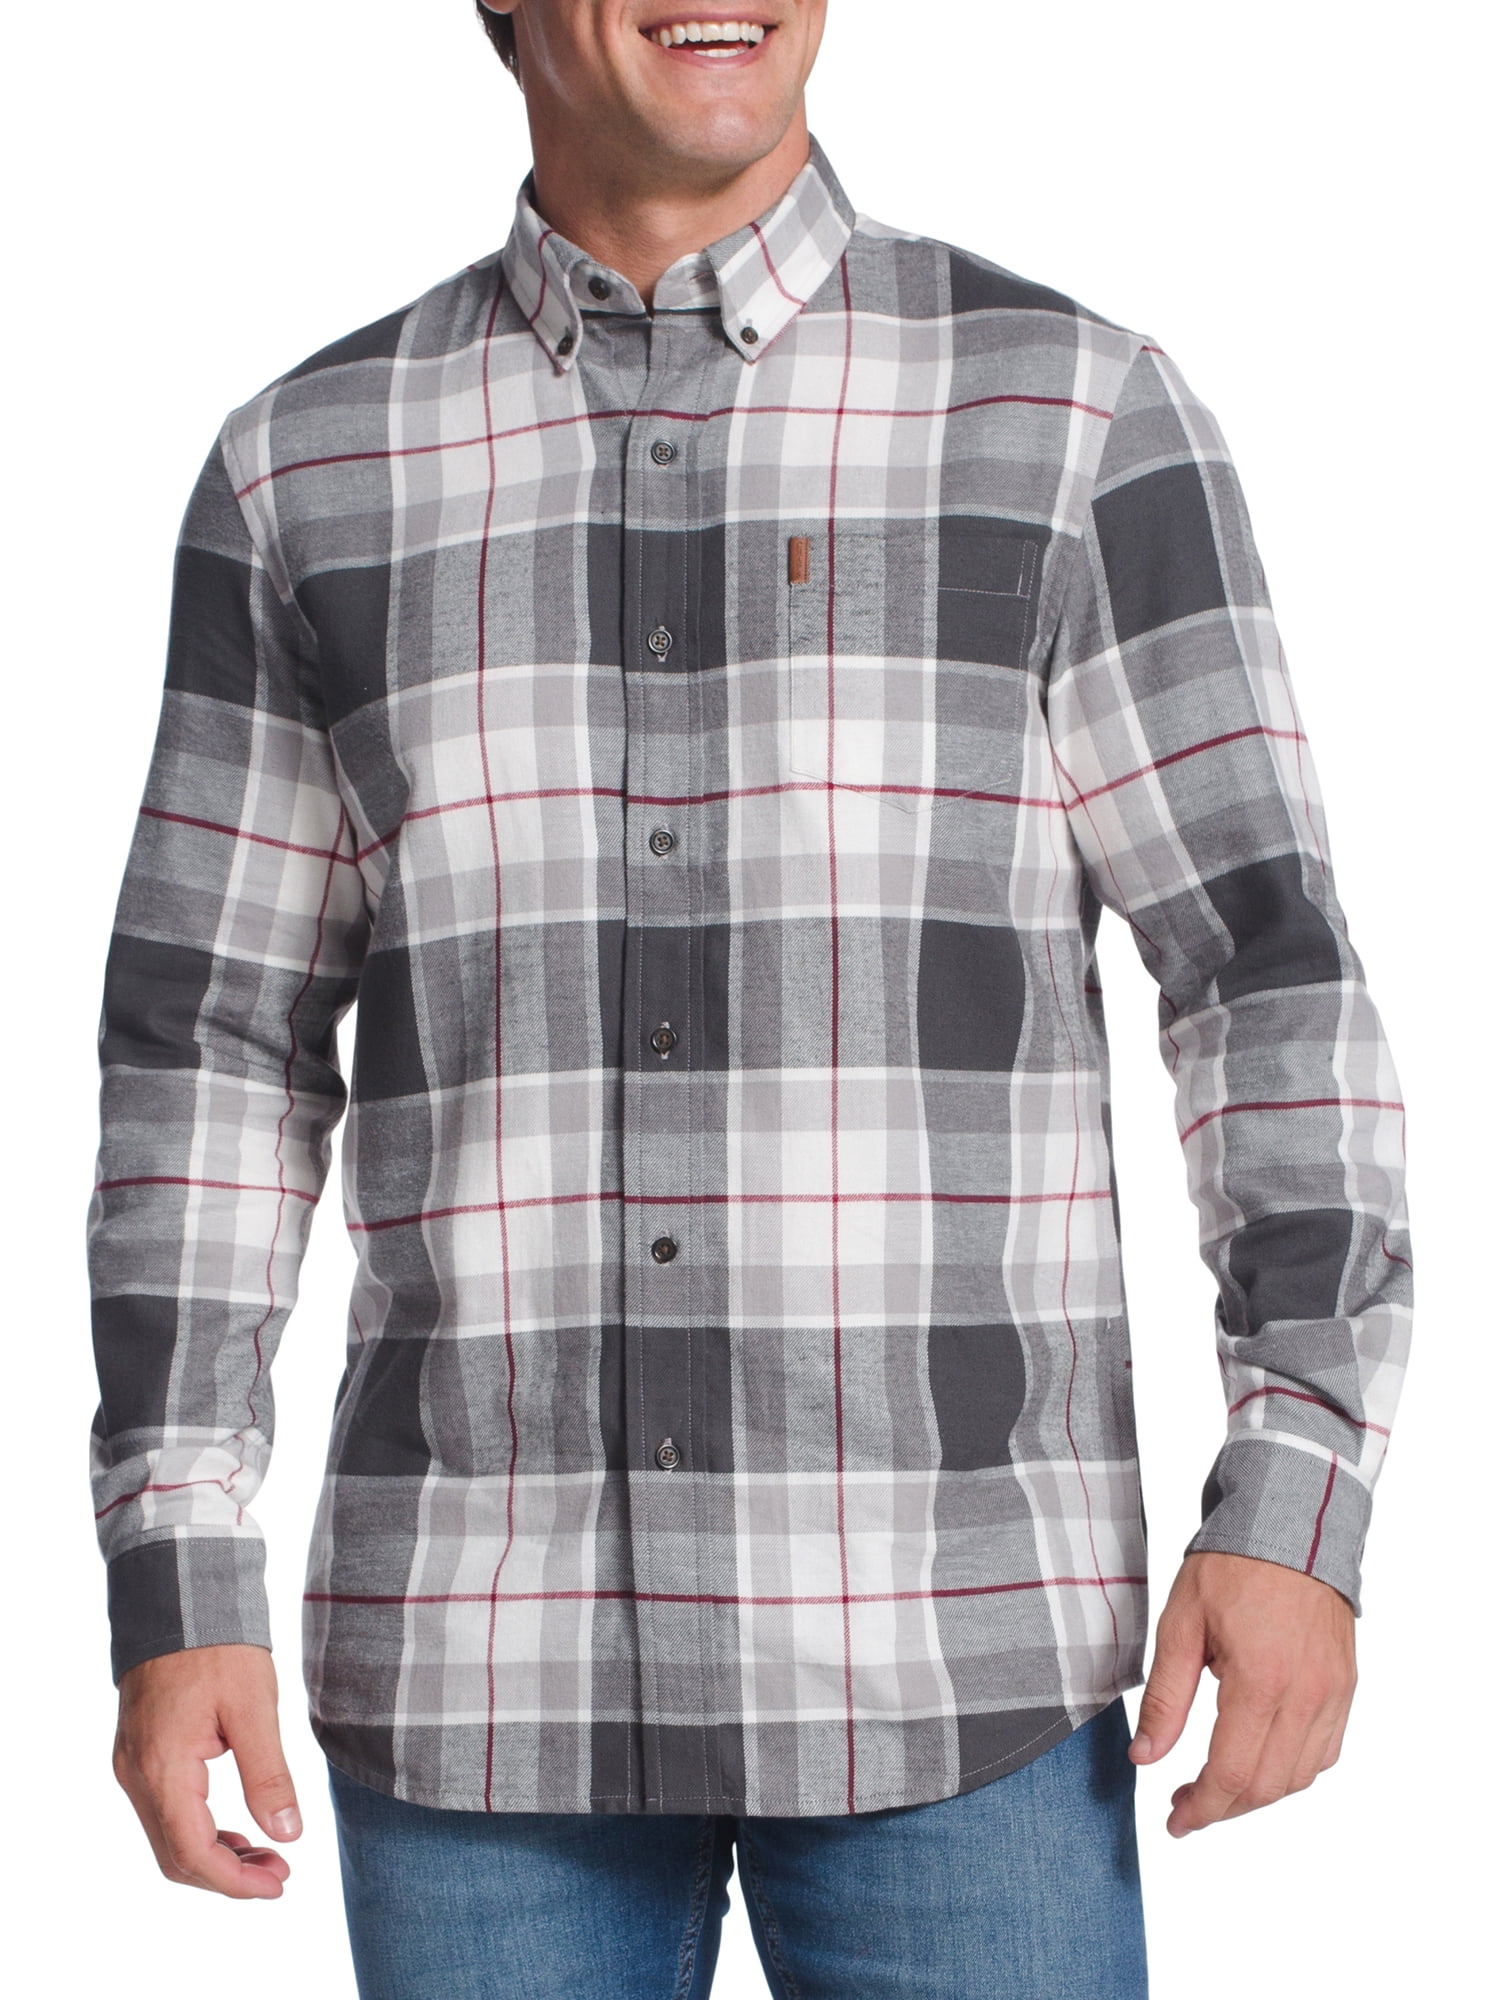 Men's Long Sleeve Flannel Casual Luxury Check Print Cotton Work Plaid Shirt Tops 